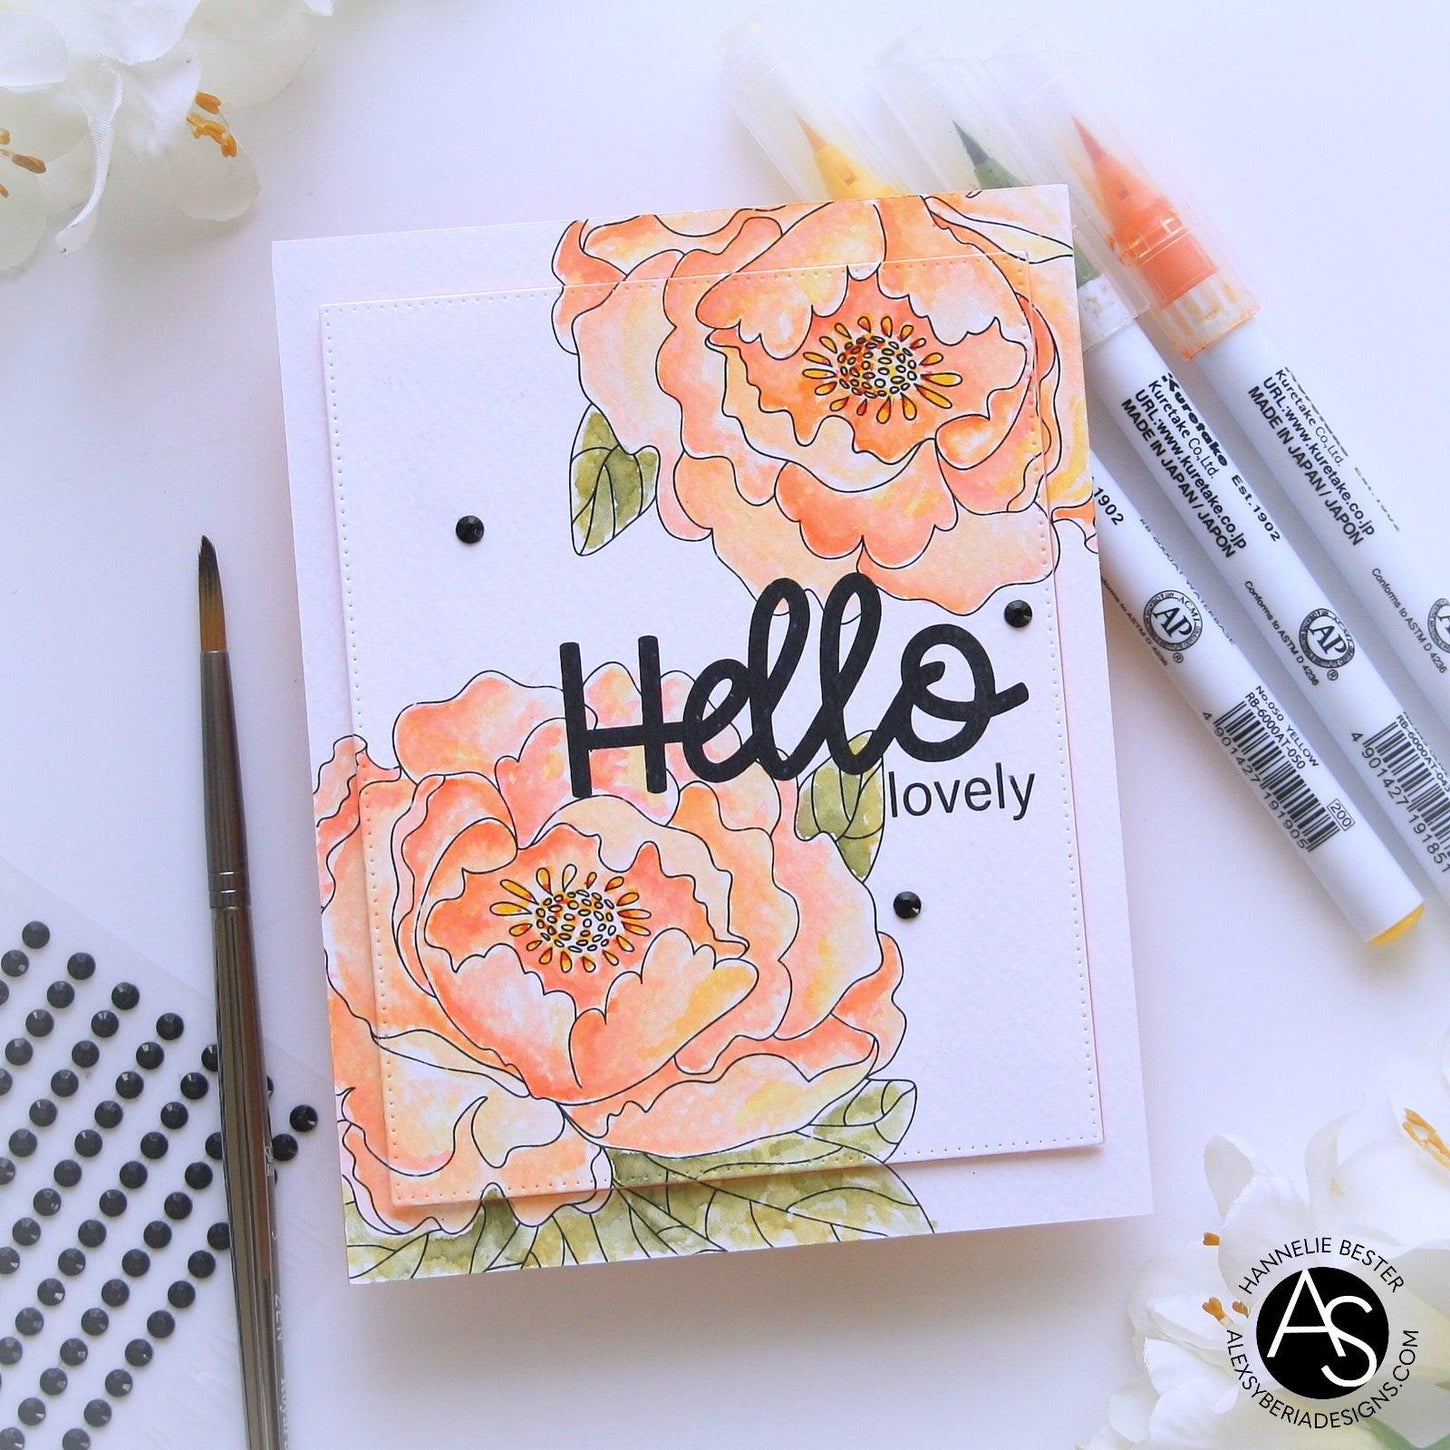 alex-syberia-designs-stamps-hello-lovely-fancy-background-die-cover-cardmaking-tutorials-tips-watercoloring-zig-markers